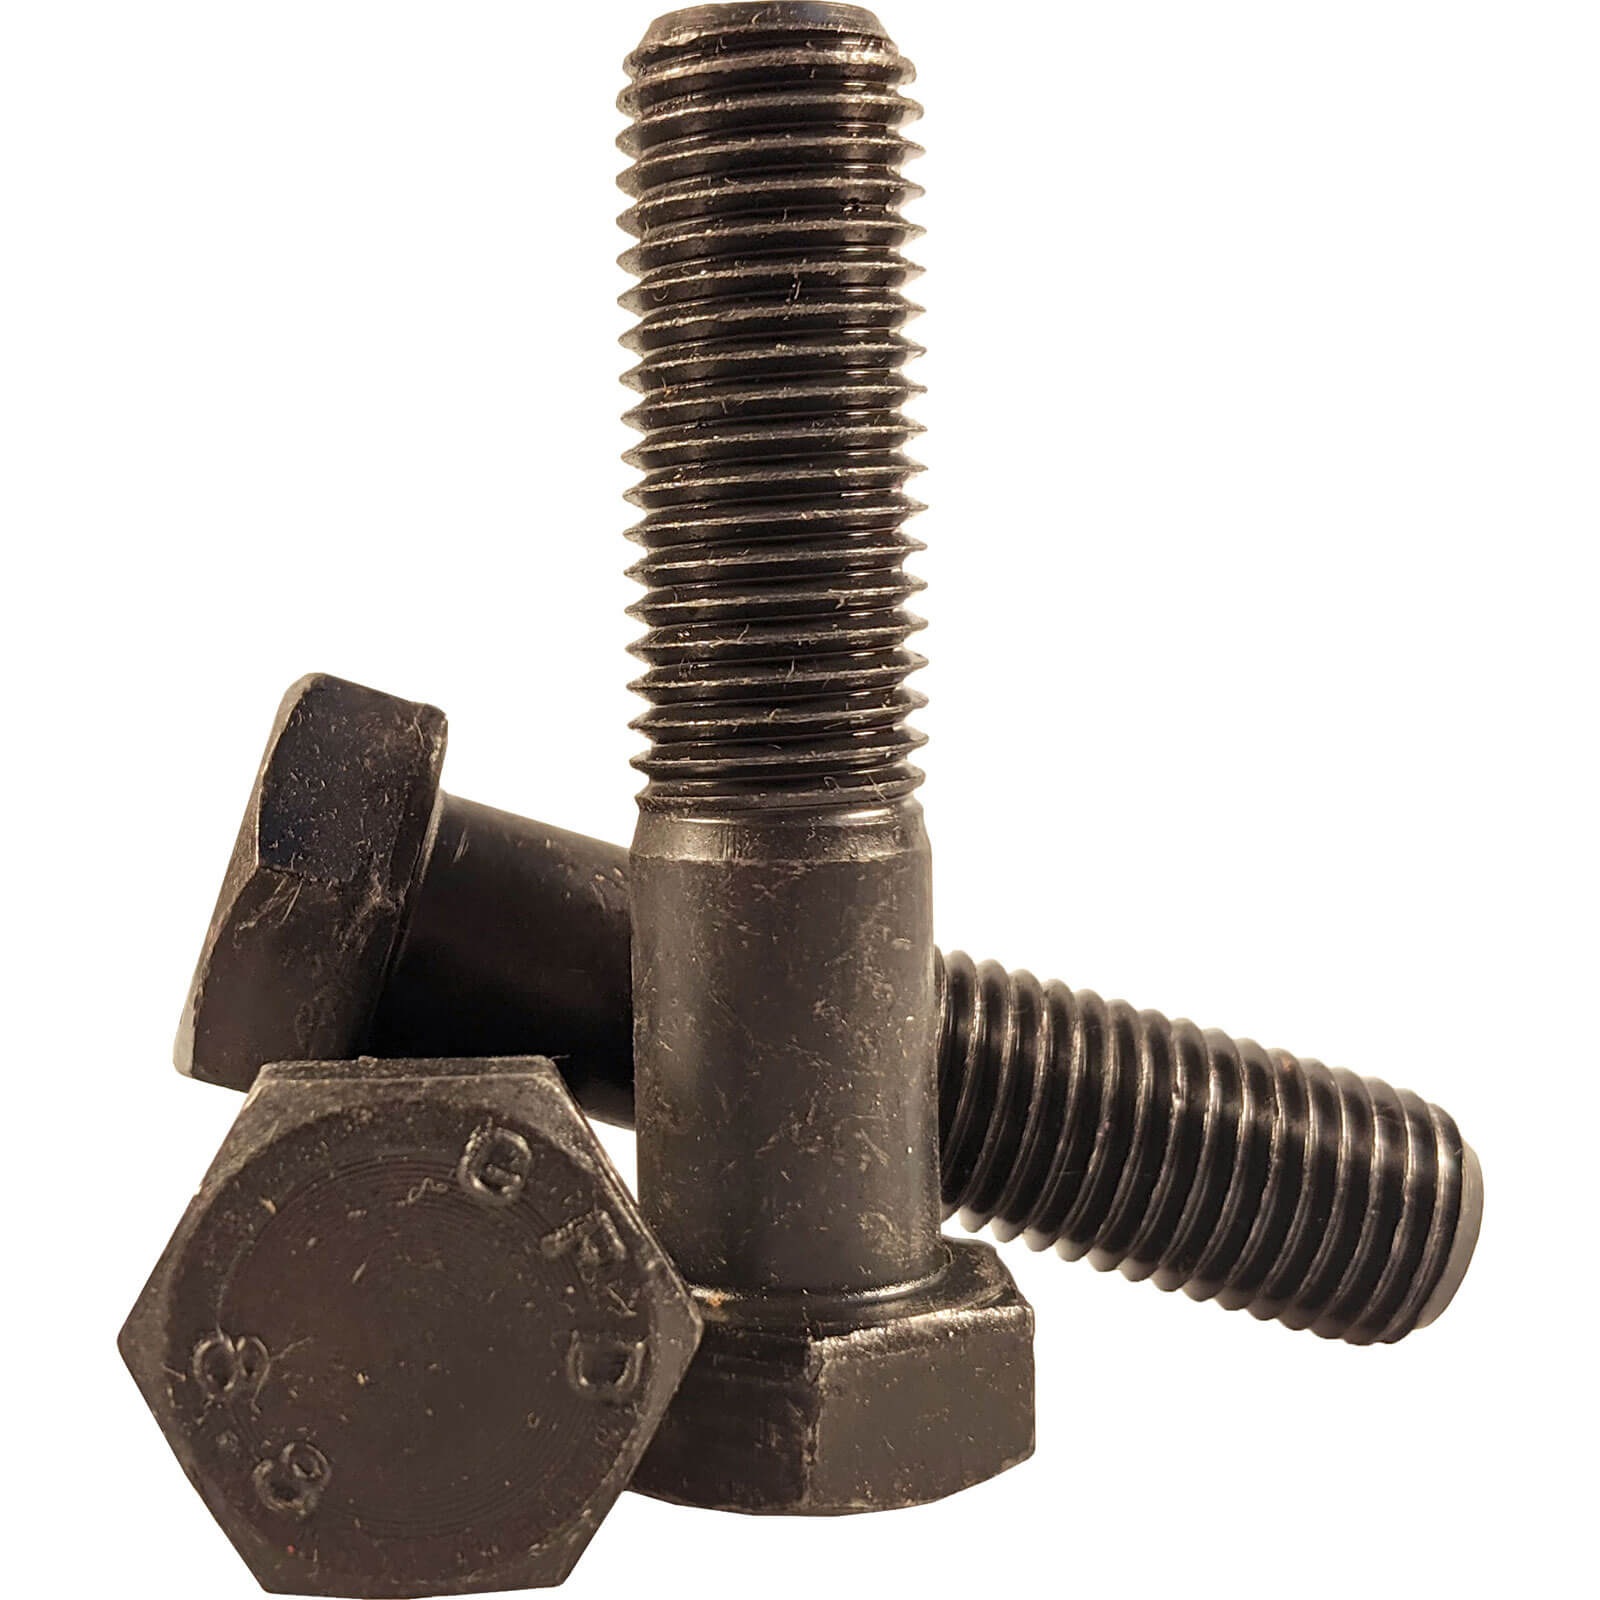 Image of Sirius Bolts High Tensil 8.8 Grade M10 90mm Pack of 1